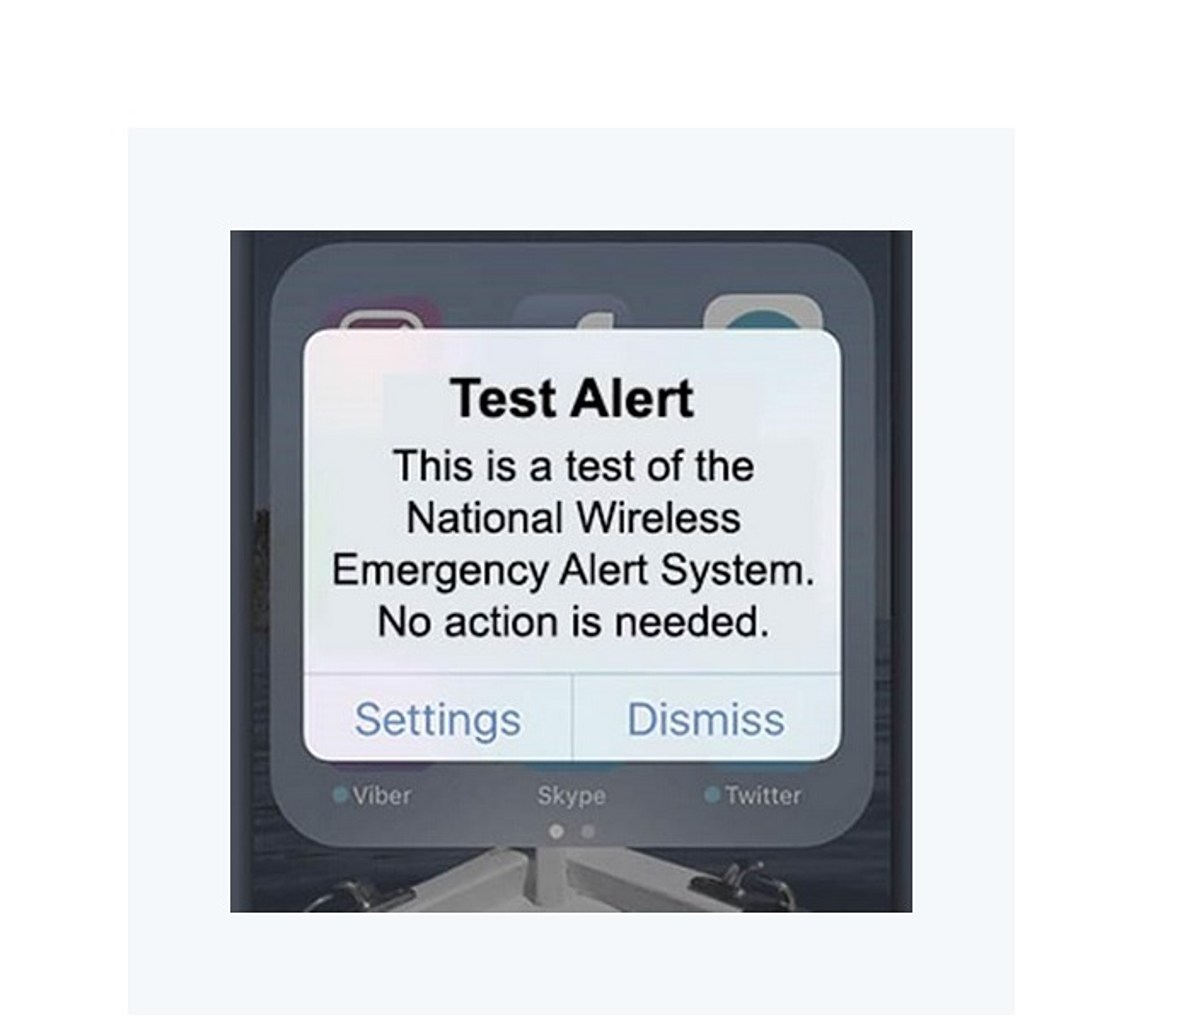 Testing of Emergency Alert System and Wireless Emergency Alert System